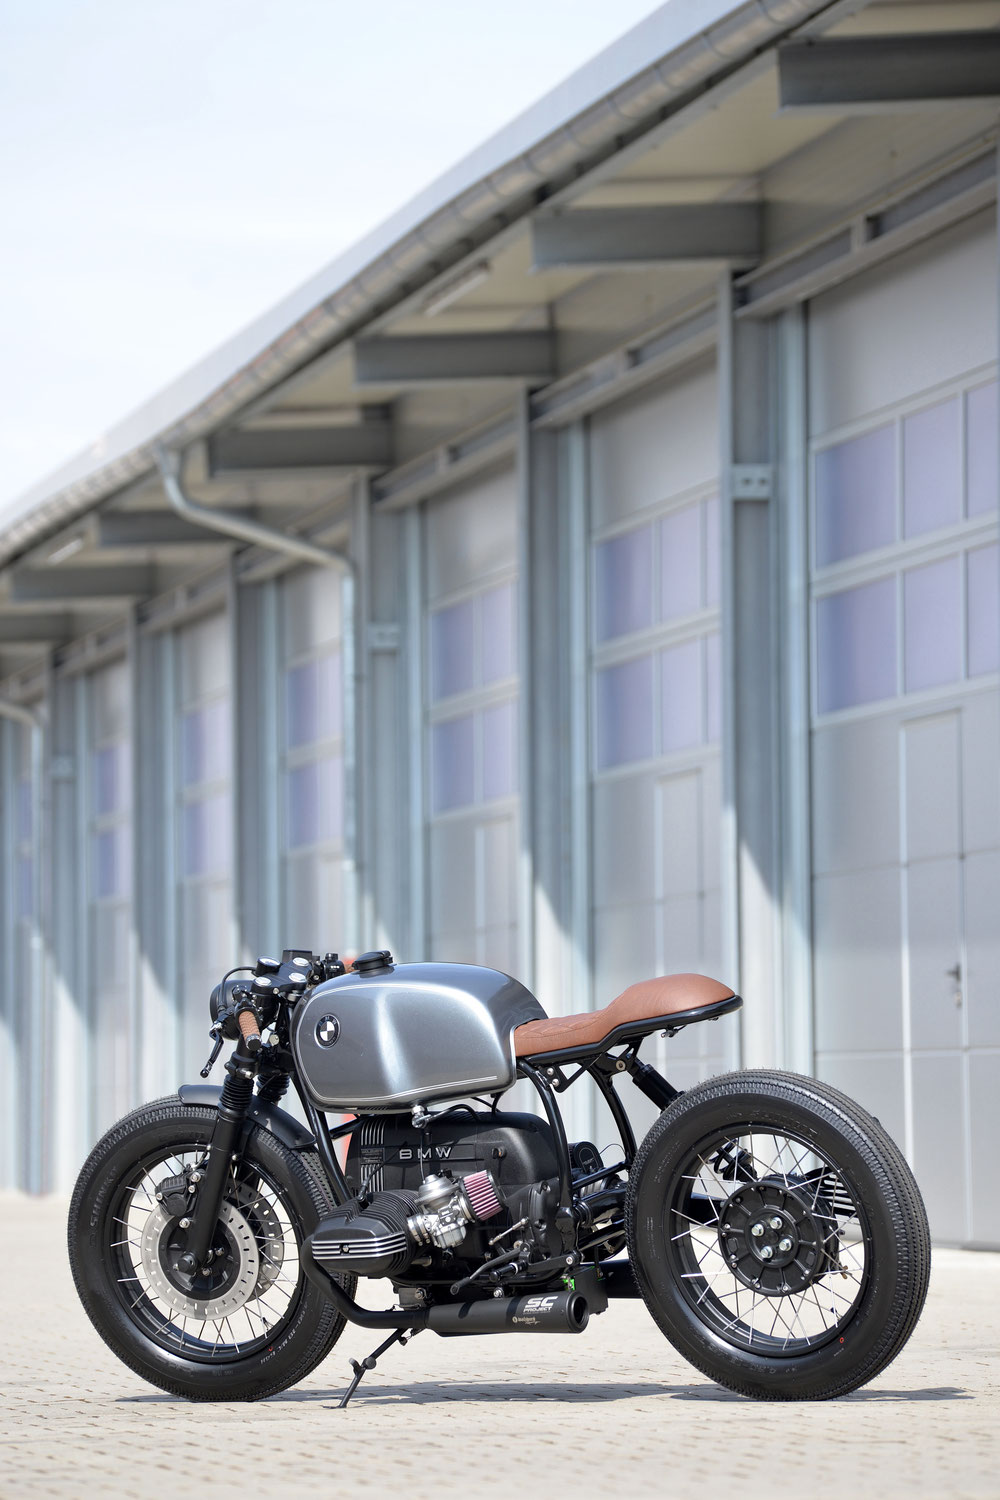 New Bike: SCHIZZO® Cafe Racer in "Grey & Brown"!